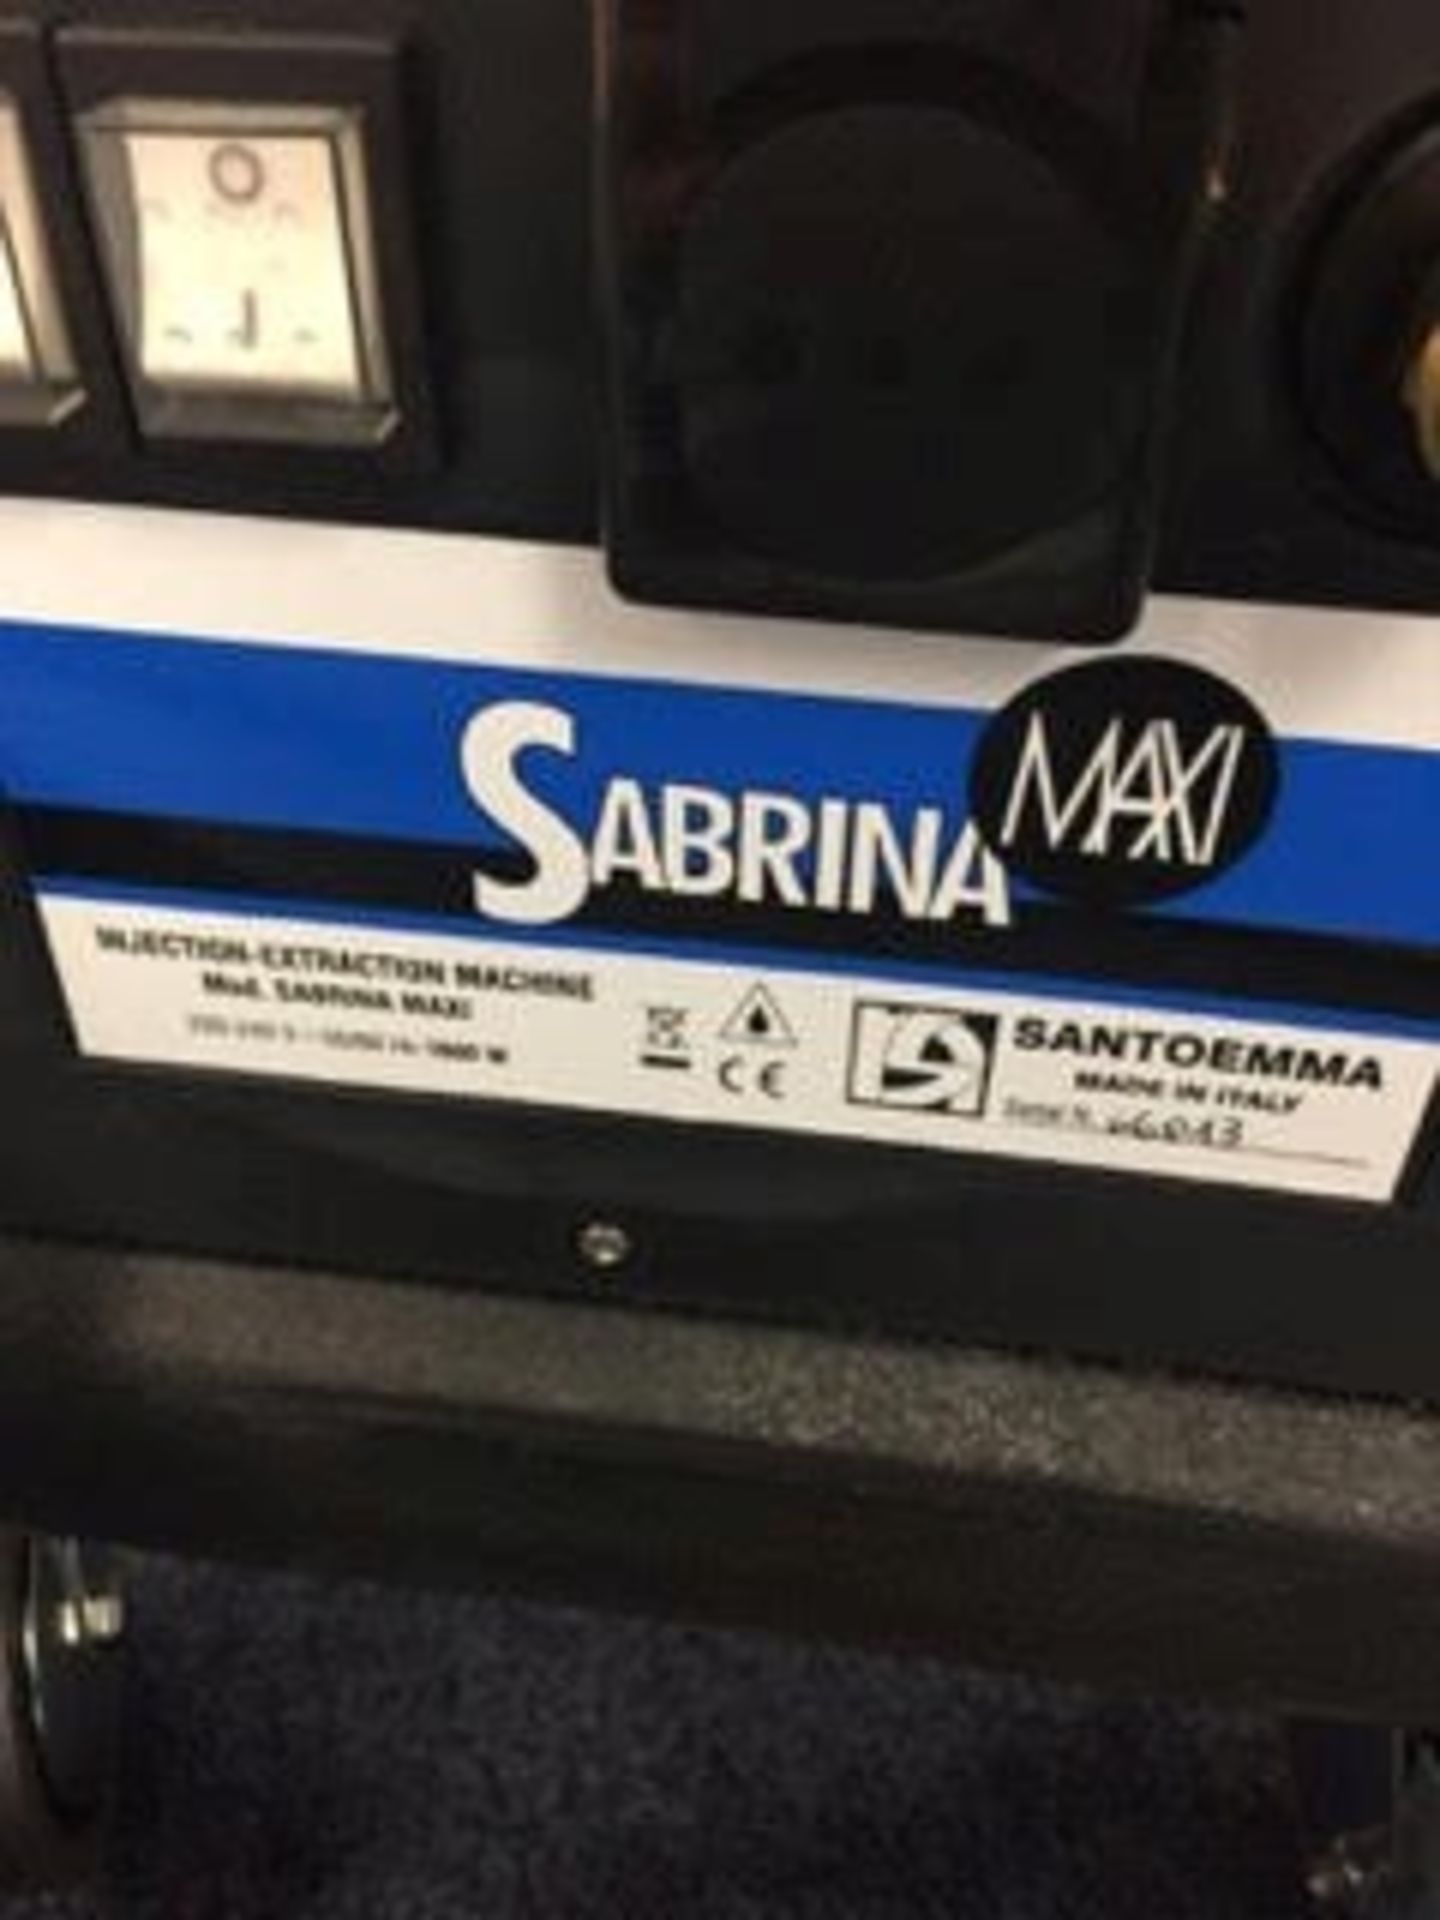 1 x SANTOEMMA "Sabrina Maxi" Commercial Cleaning Machine - Ideal For Professional Cleaning - Image 3 of 3